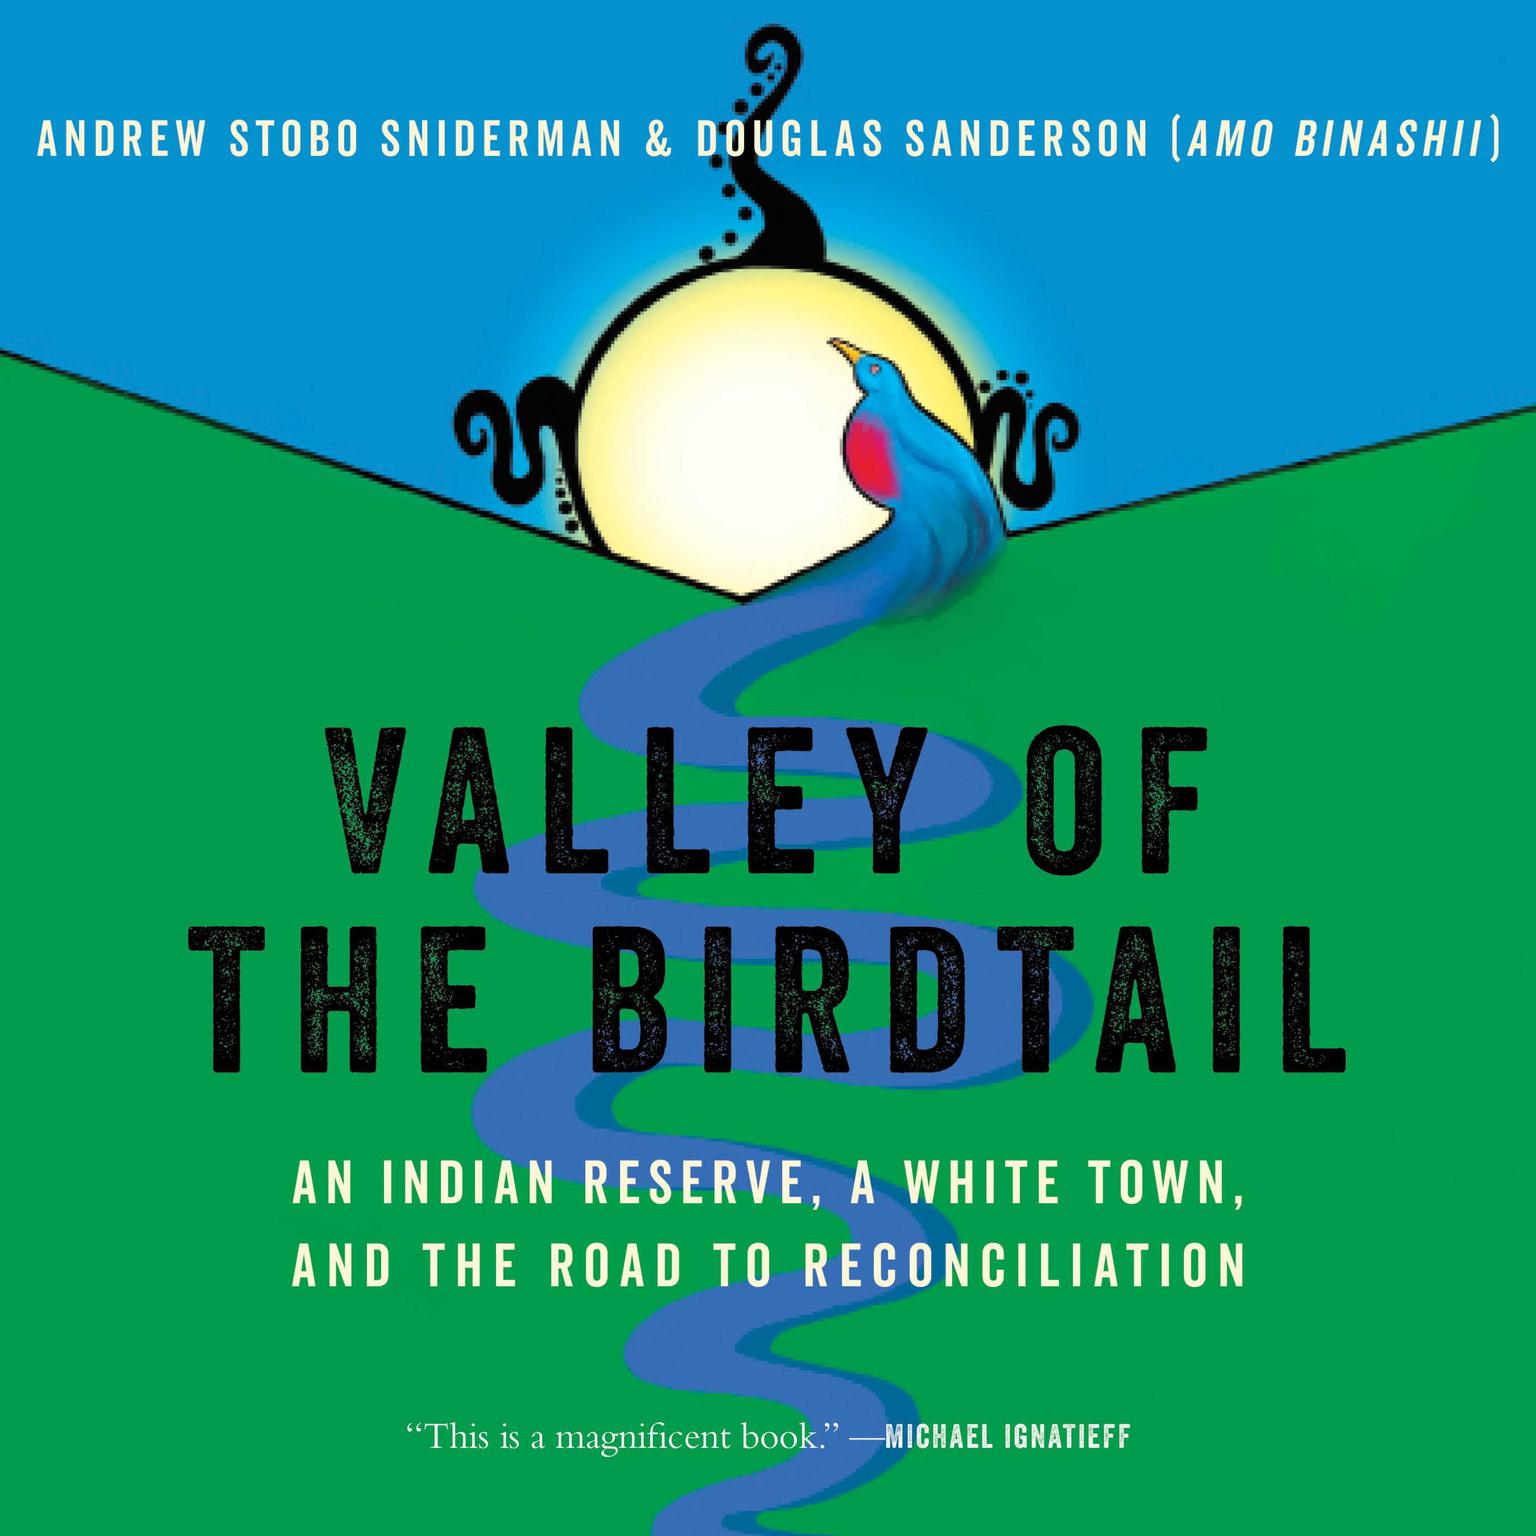 Valley of the Birdtail: An Indian Reserve, a White Town, and the Road to Reconciliation Audiobook, by Andrew Stobo Sniderman